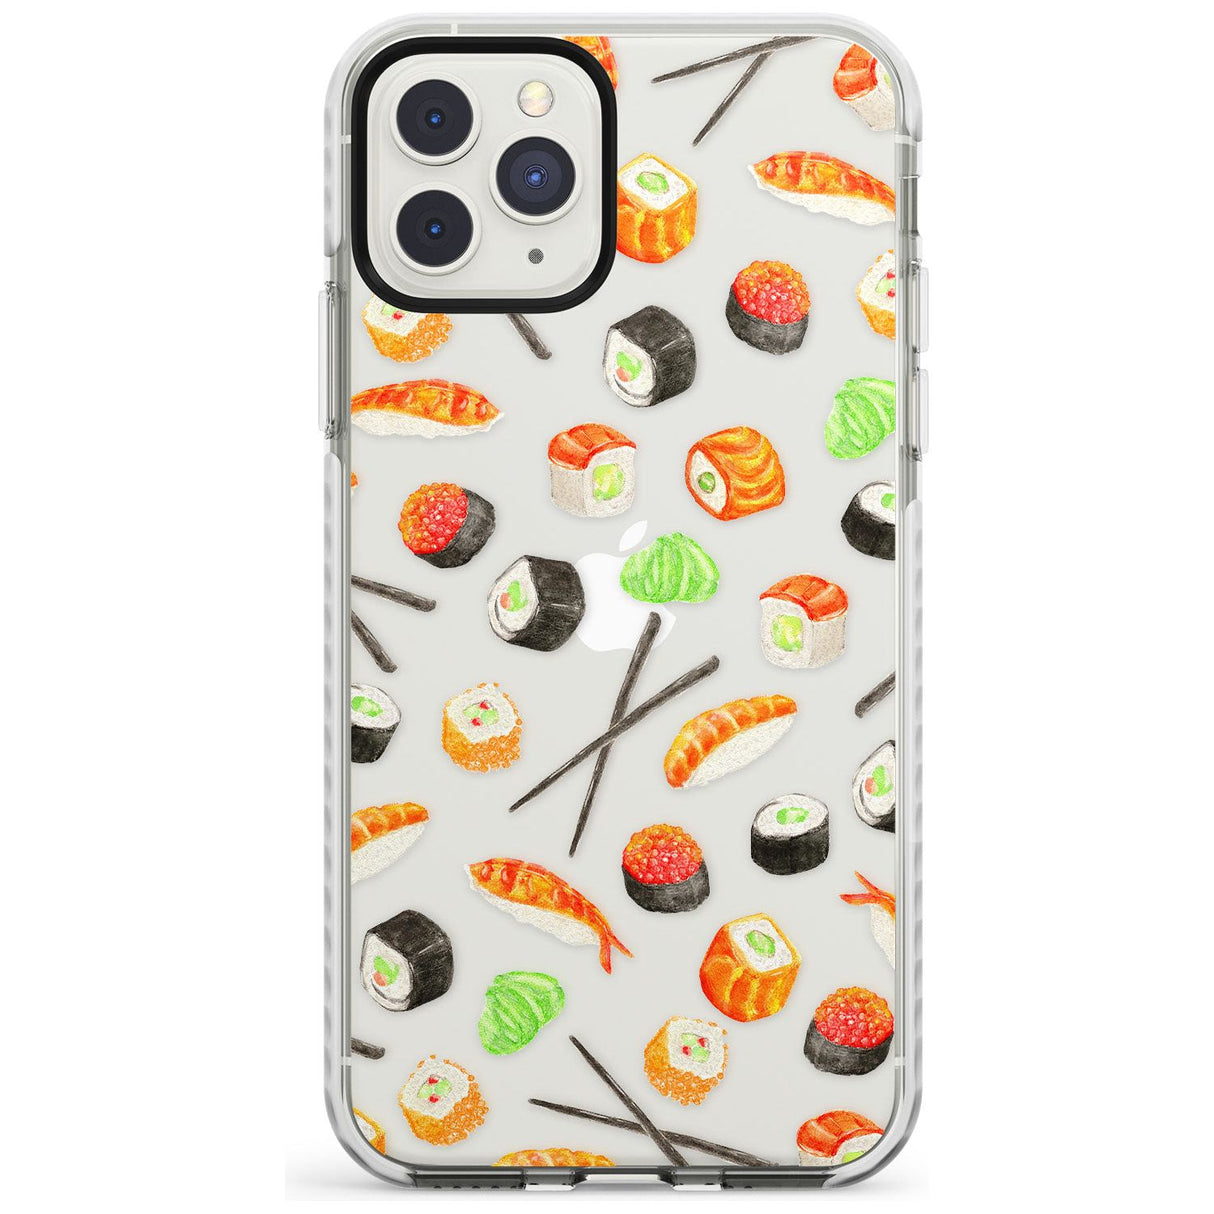 Sushi & Chopsticks Watercolour Pattern Impact Phone Case for iPhone 11 Pro Max